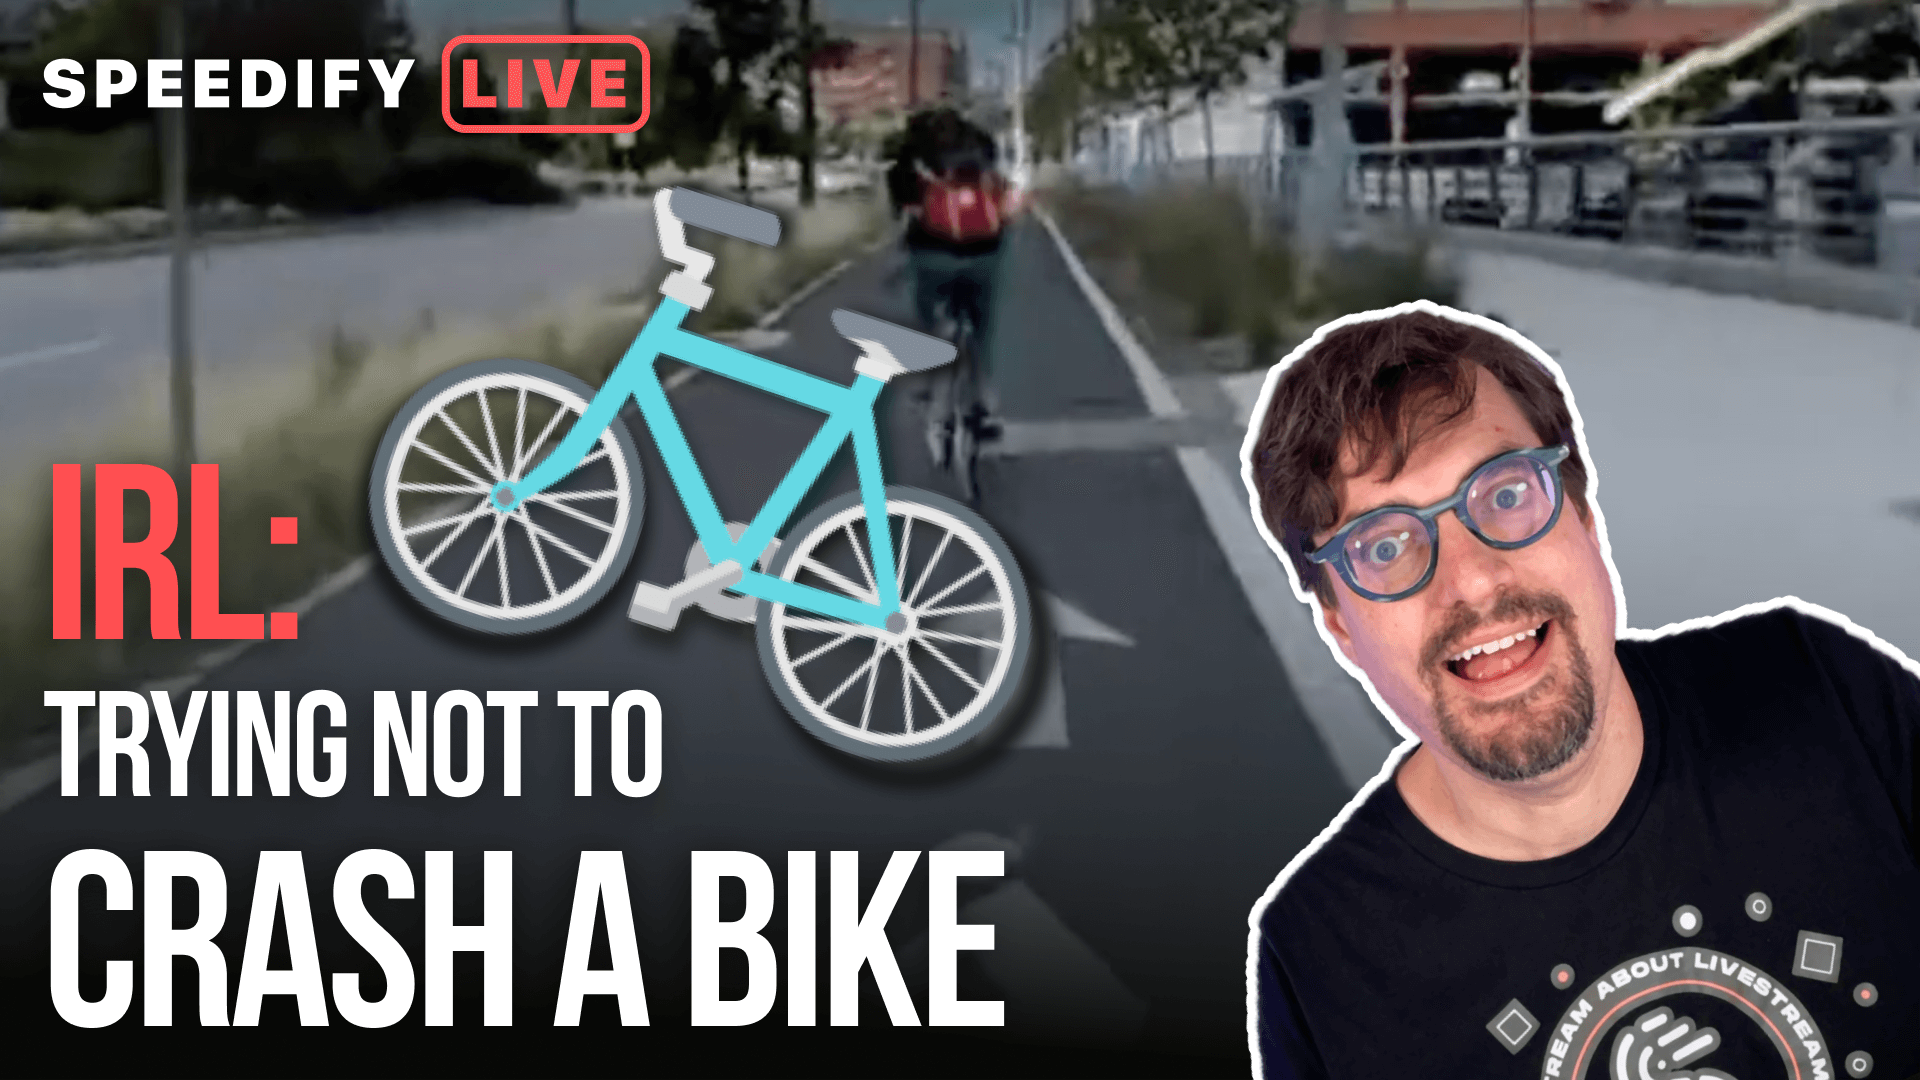 IRL Trying NOT to Crash our Bike while Pushing 5G Livestreaming to the Limit Speedify LIVE